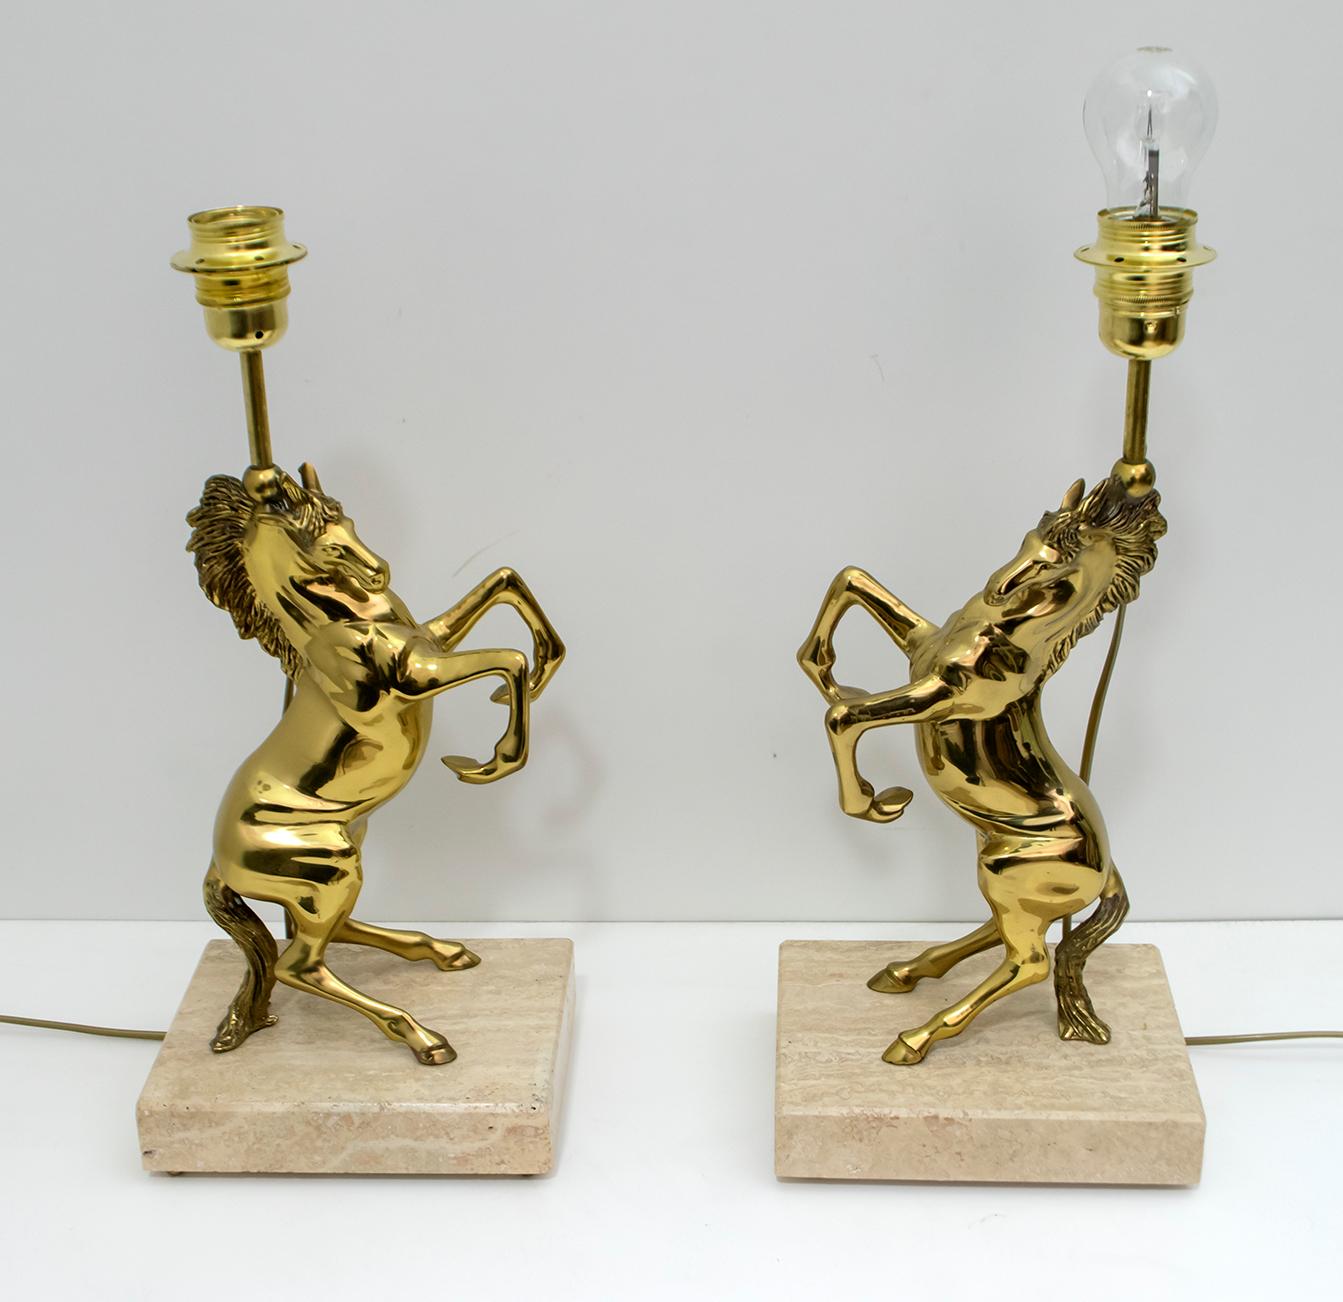 This pair of French lamps were produced in the 1970s by Maison Charles. 
The lamps, two horses in polished brass resting on a travertine base and brass feet.